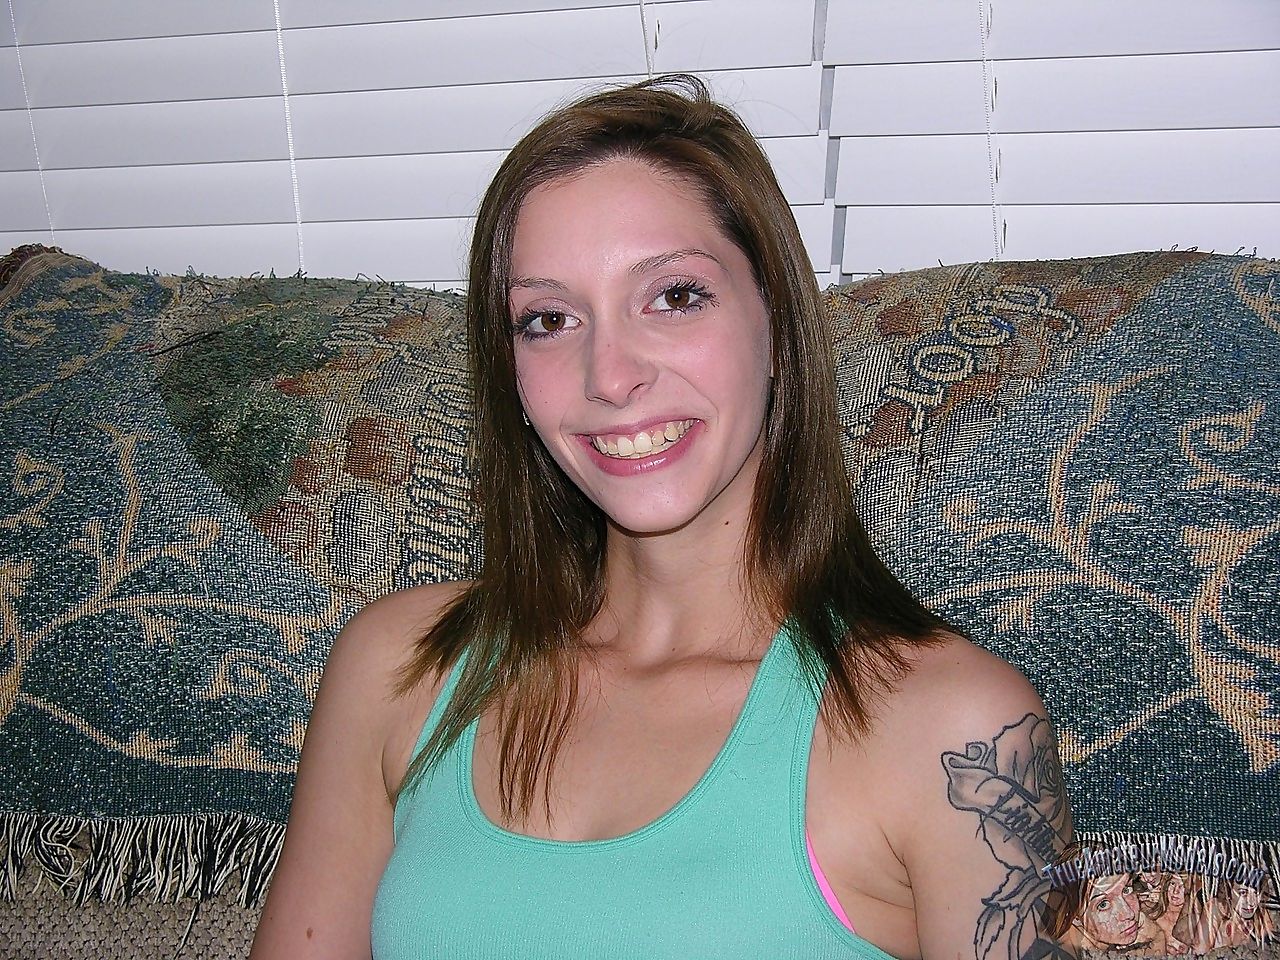 Skinny flat chested tattooed amateur spreading butt cheeks for asshole closeup